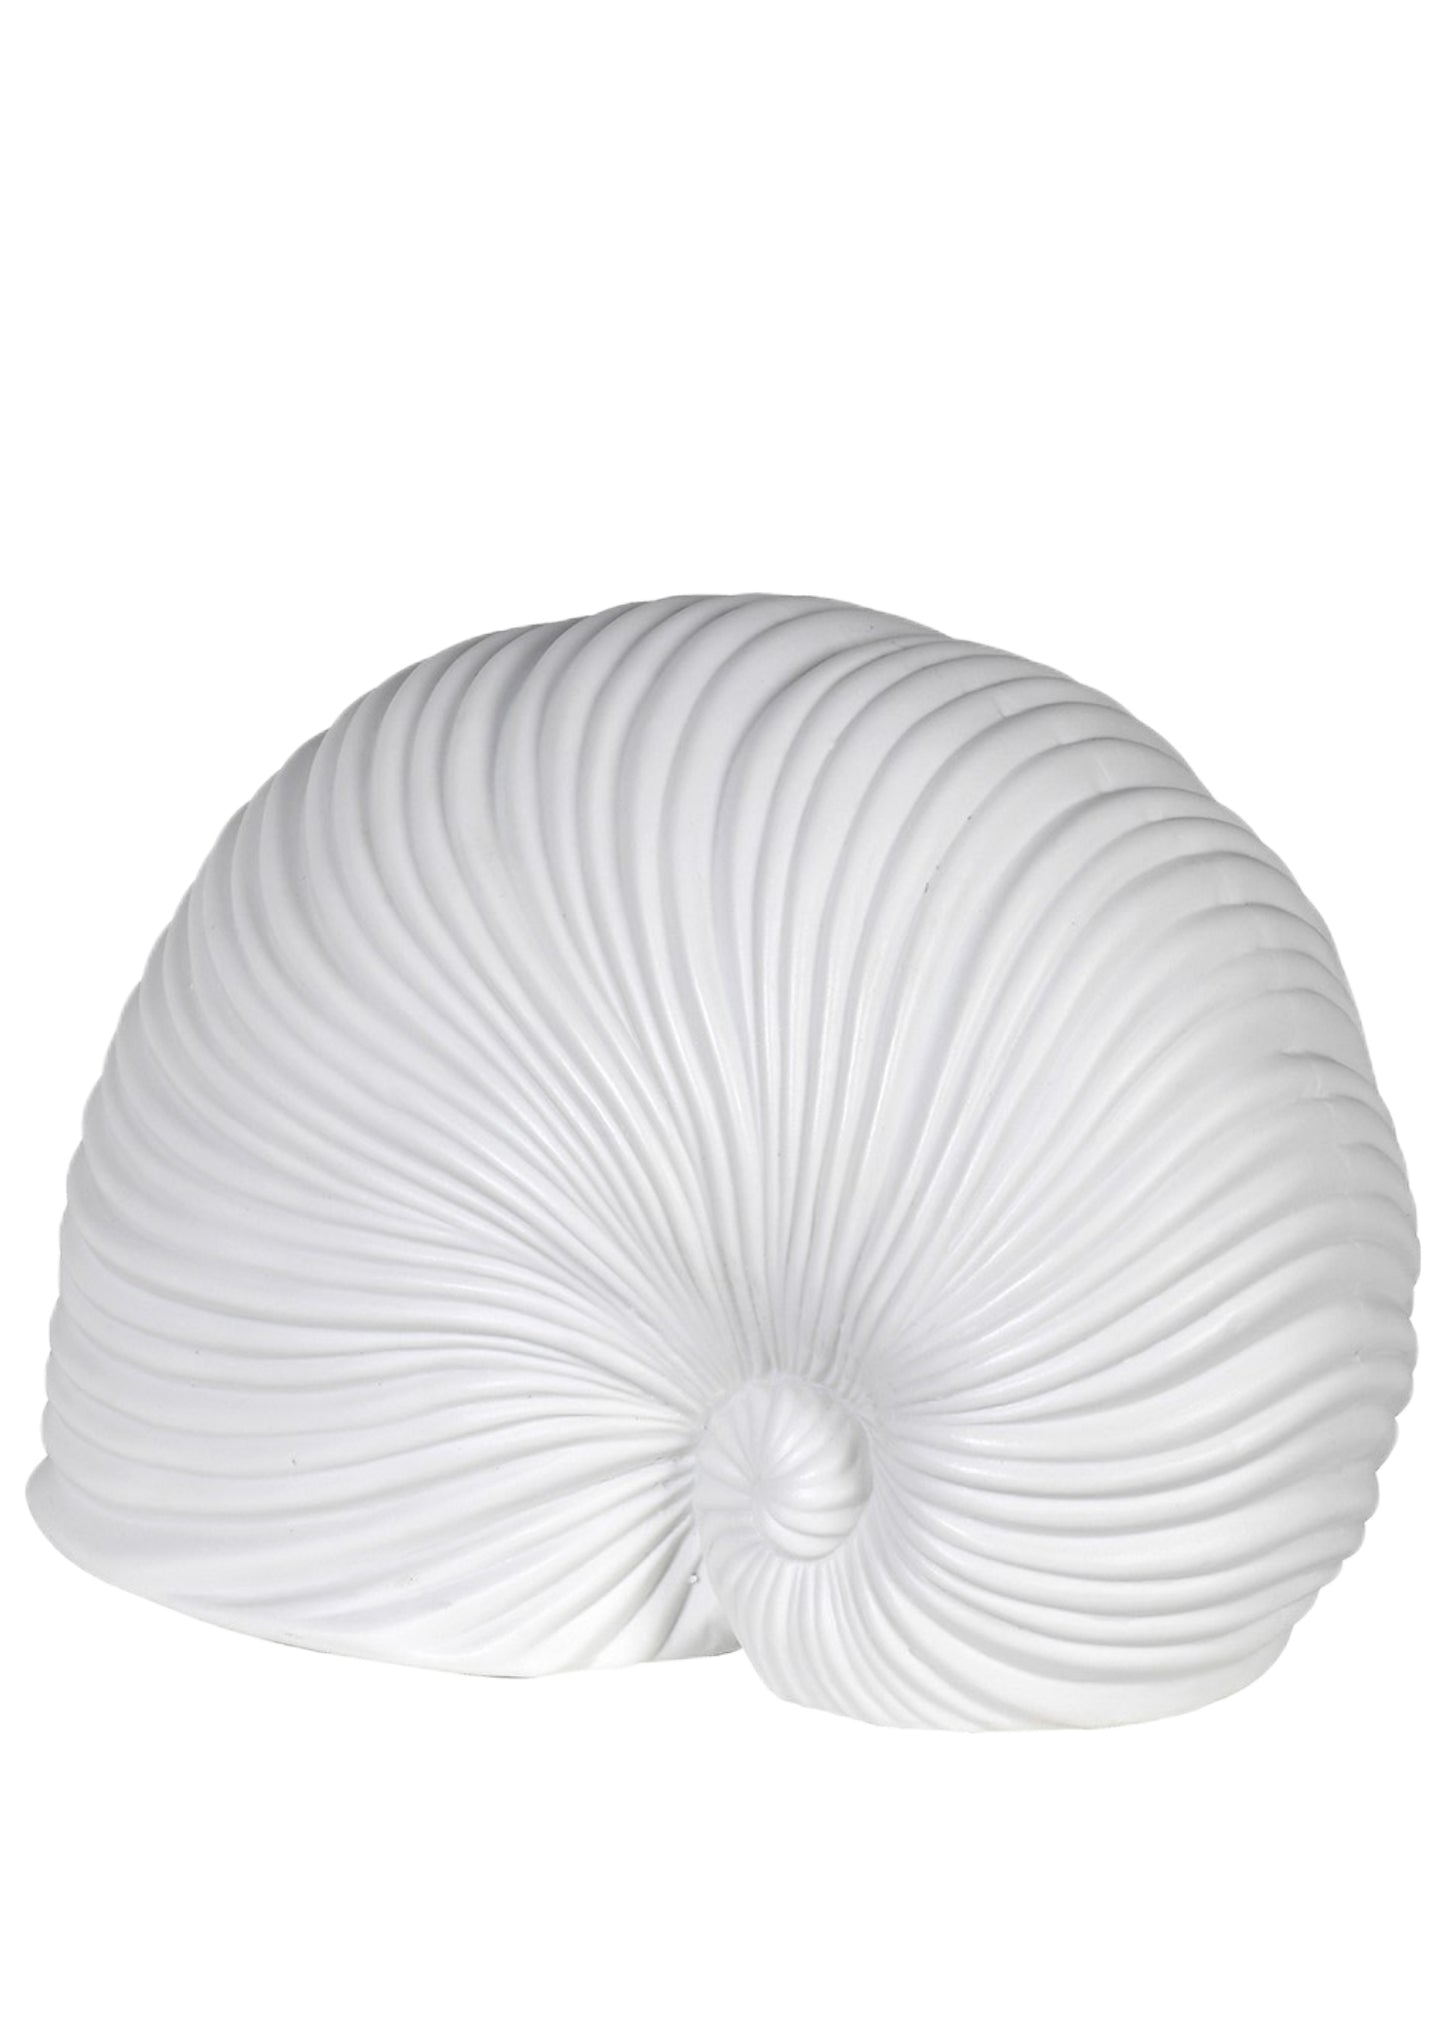 Load image into Gallery viewer, White Porcelain Sea Snail Ornament
